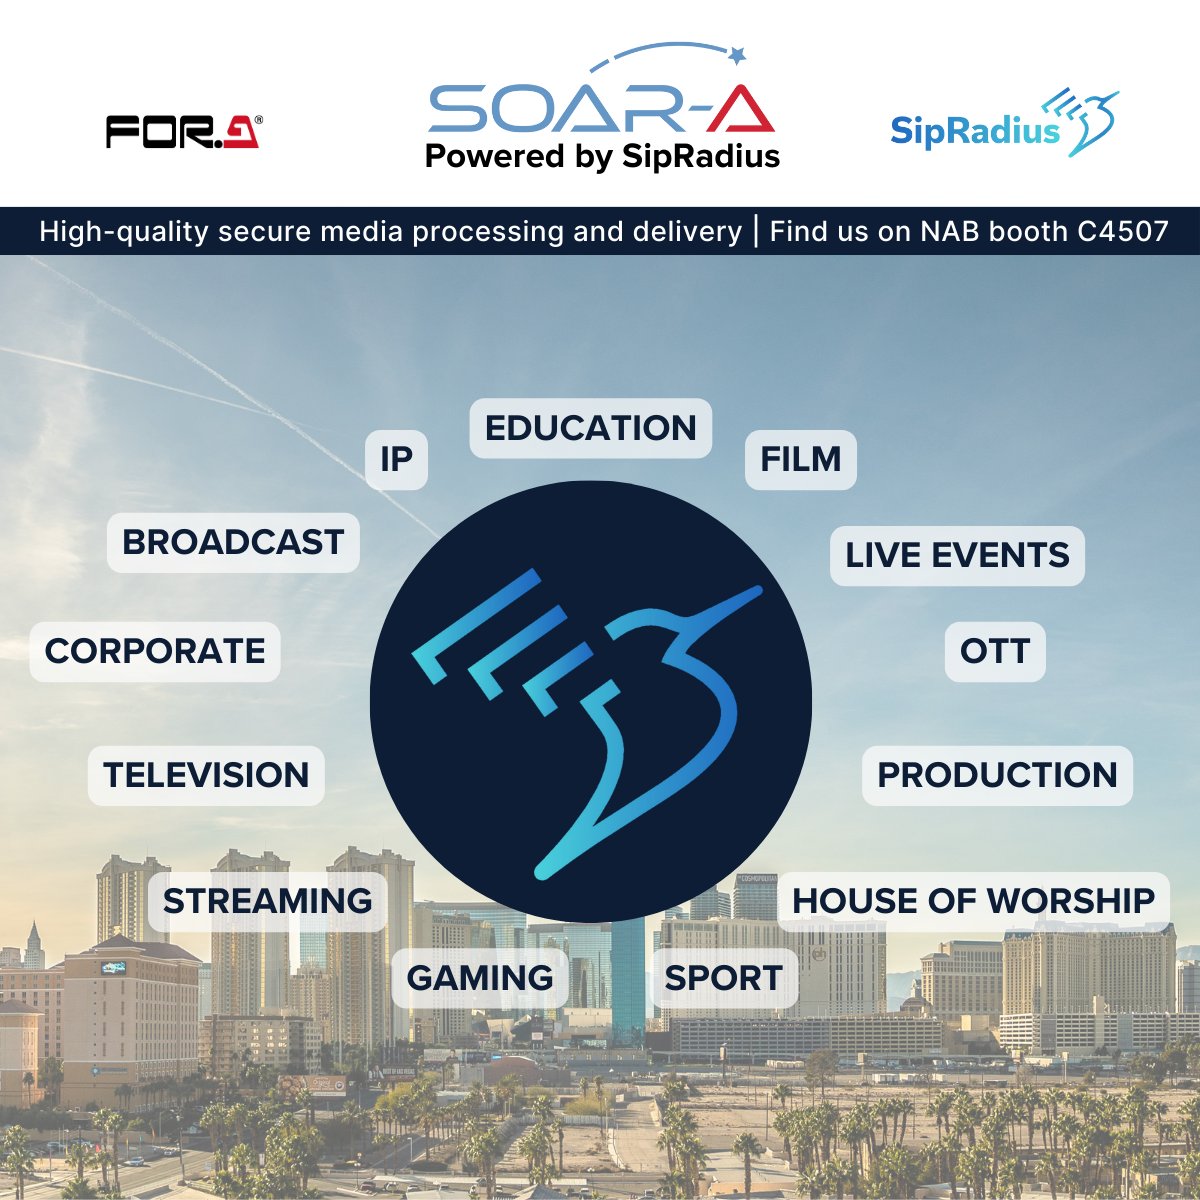 We’re heading to @NABShow to showcase our transformative approach to #IP content transport (as a FOR-A platform powered by #SipRadius). Read more about our #software solution, already proven in use by major #broadcasters, here: bit.ly/432DhbK #NABShow @foracorporation